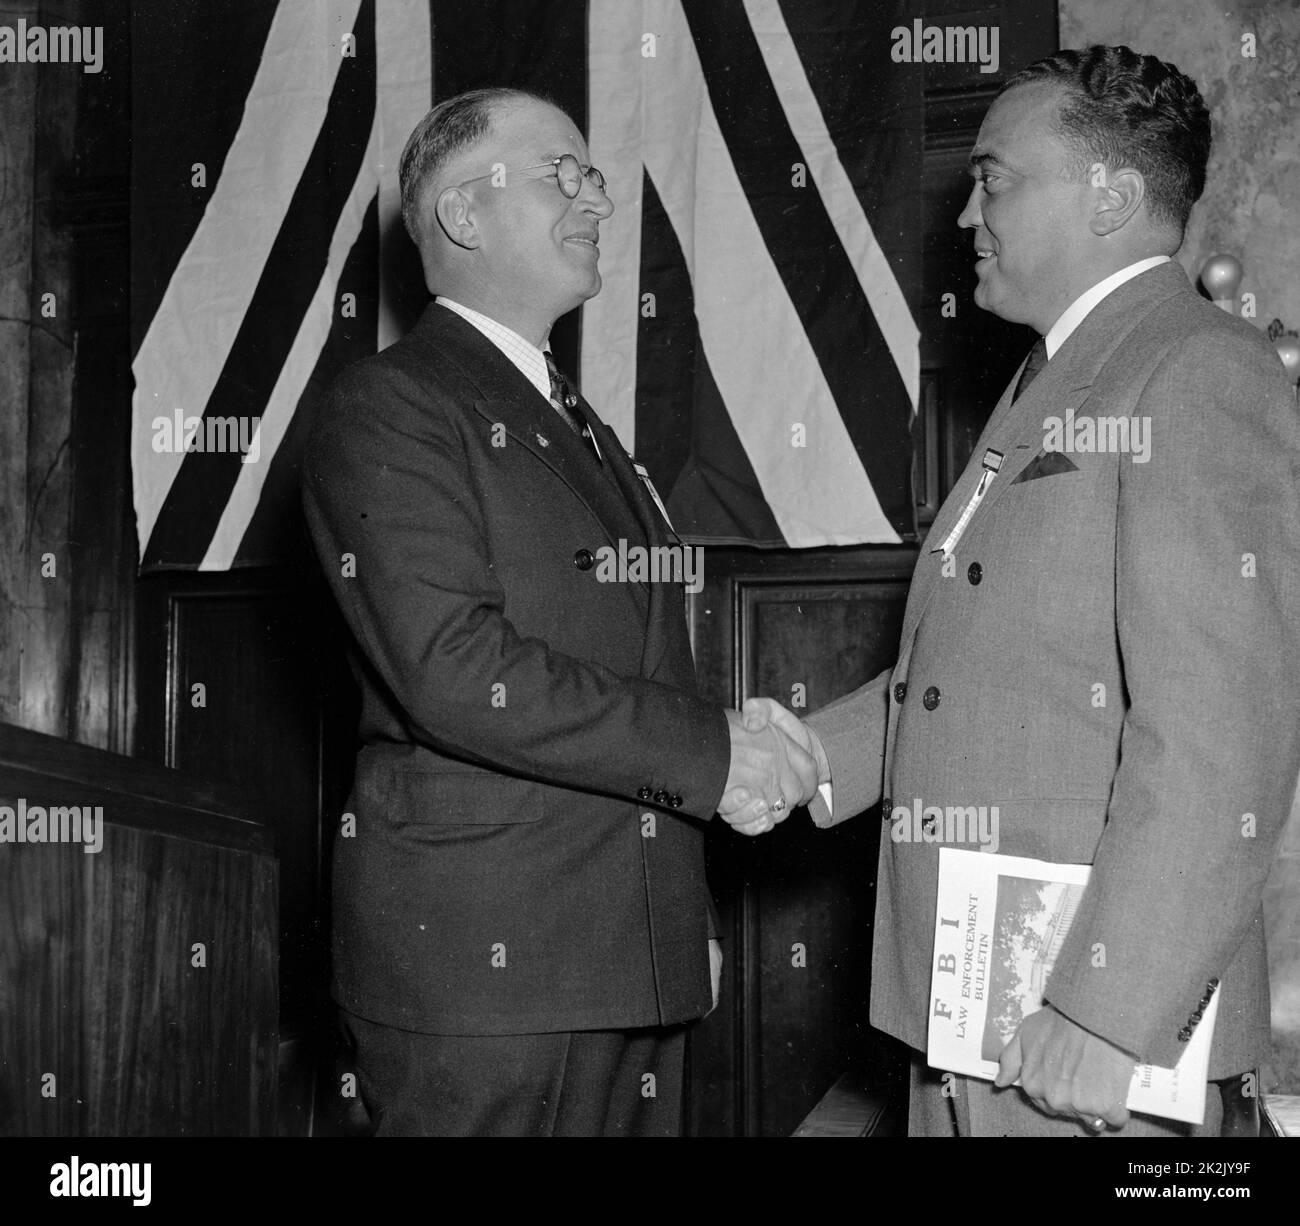 J. Edgar Hoover, (right) Director of The Federal Bureau of Investigation, is greeted by Arthur Muchow, President of the International Association for Identification, as he arrived at the Willard Hotel today to welcome Delegates to the Annual Convention of the Association. 1937 . J. Edgar. Hoover 1895-1972. Director of the FBI (Federal Bureau of Investigation), from 1924-1972. Stock Photo